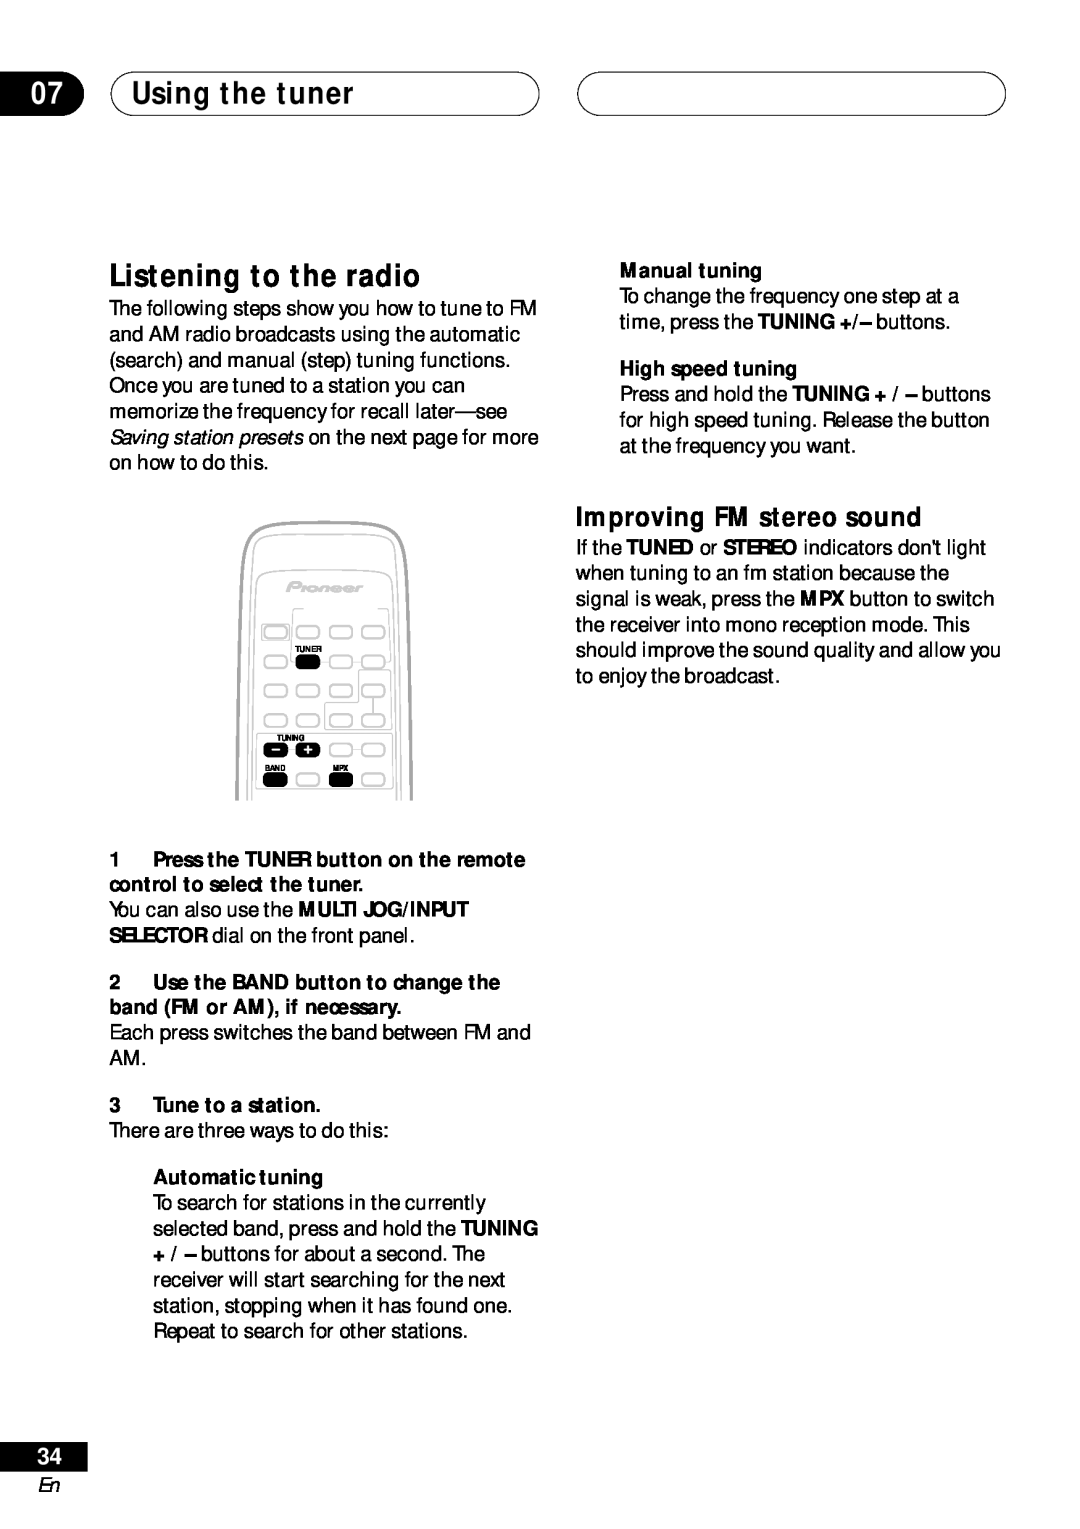 Pioneer VSX-D411 operating instructions 07Using the tuner Listening to the radio, Improving FM stereo sound 